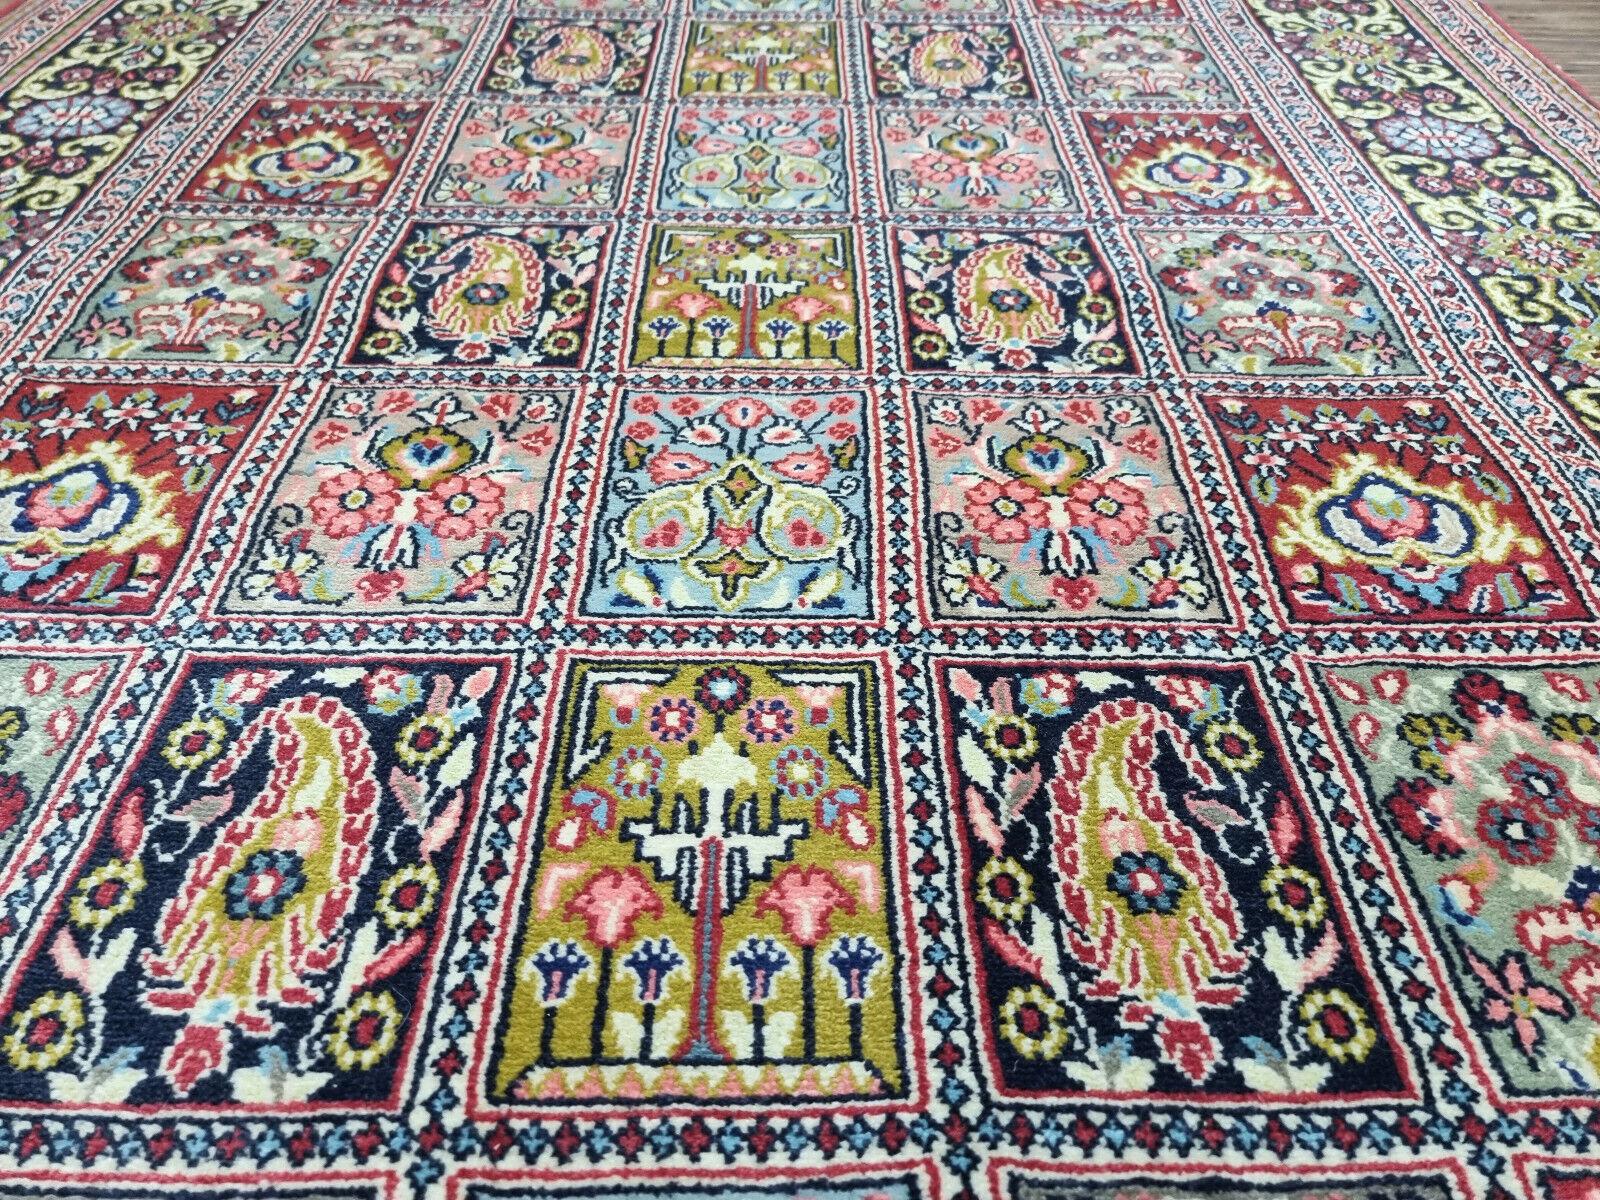 Handmade Vintage Persian Style Qum Rug 3.6' x 5.1', 1970s - 1D87 For Sale 2